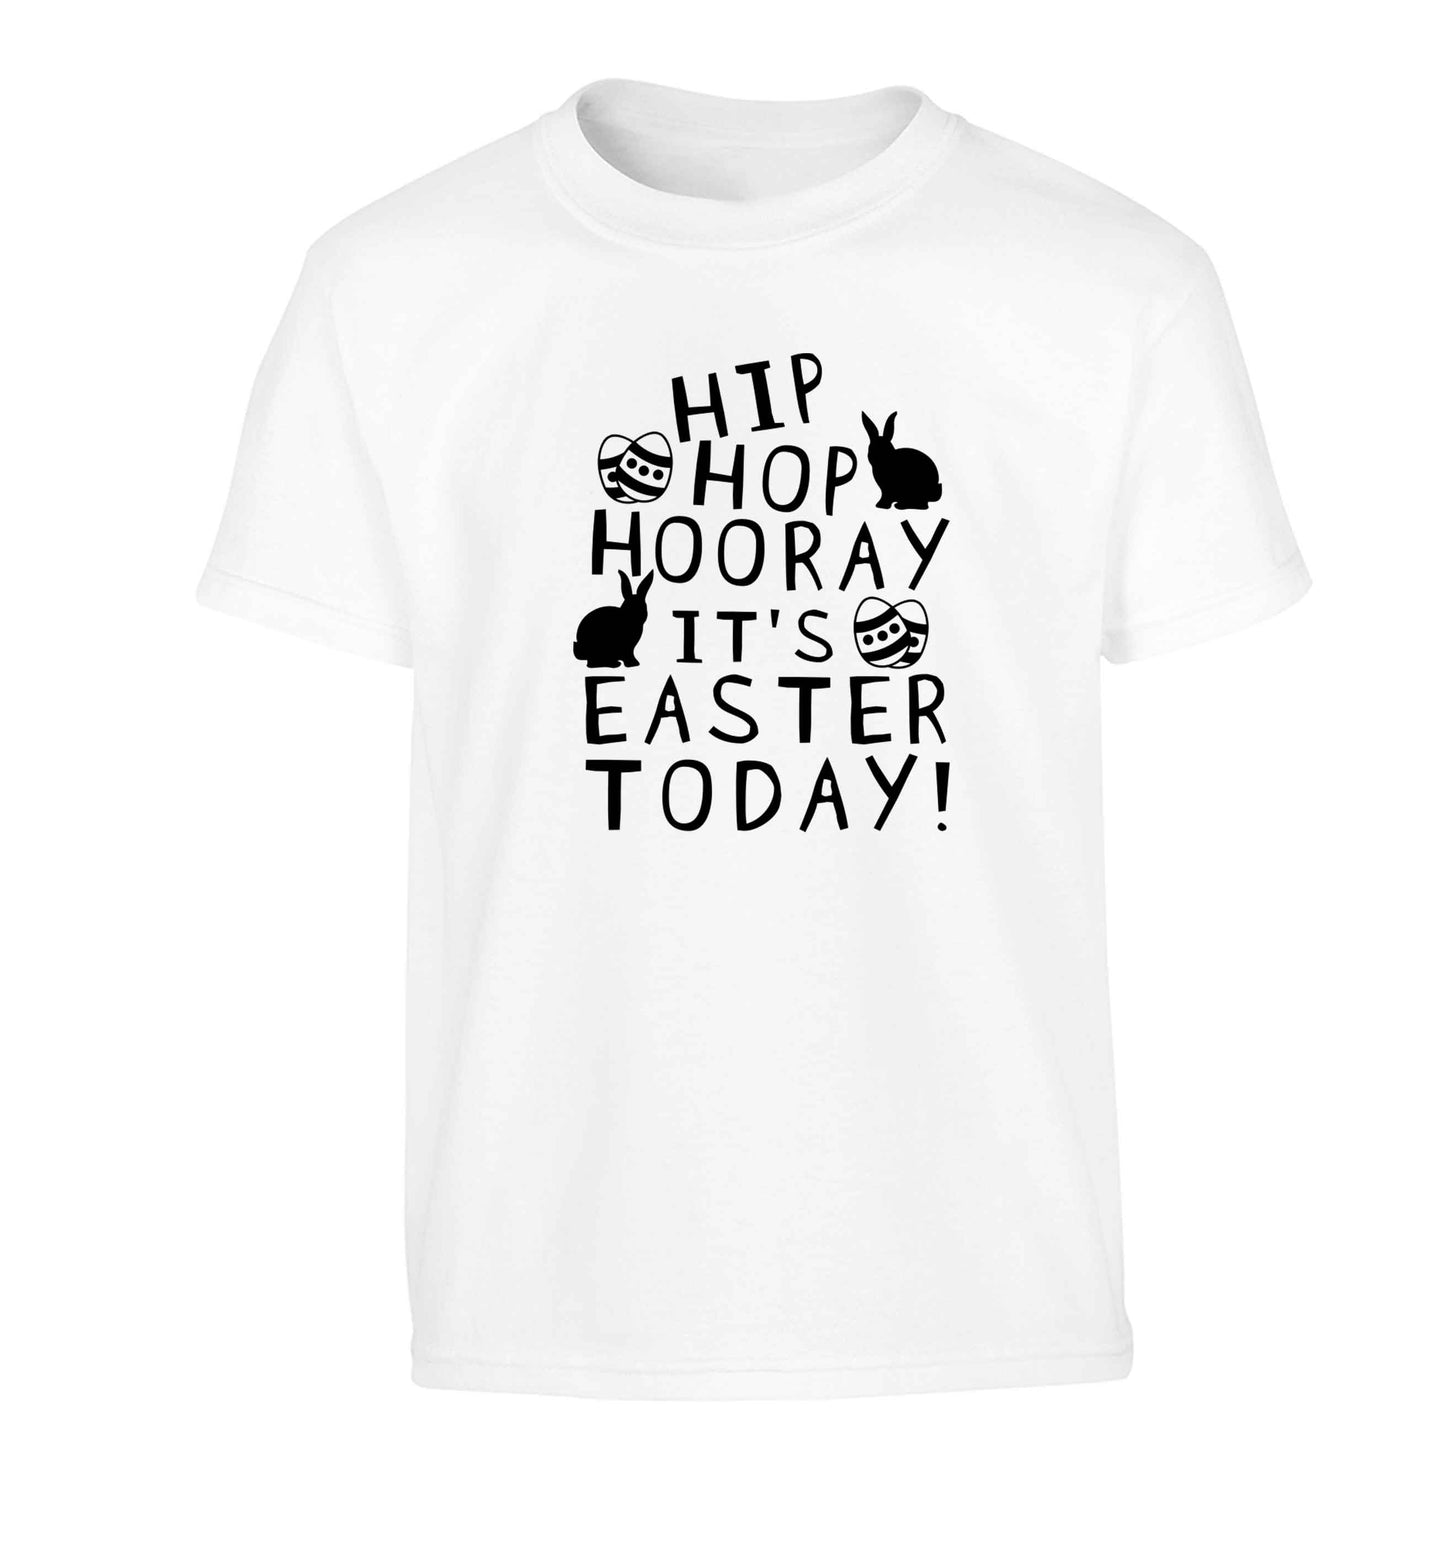 Hip hip hooray it's Easter today! Children's white Tshirt 12-13 Years